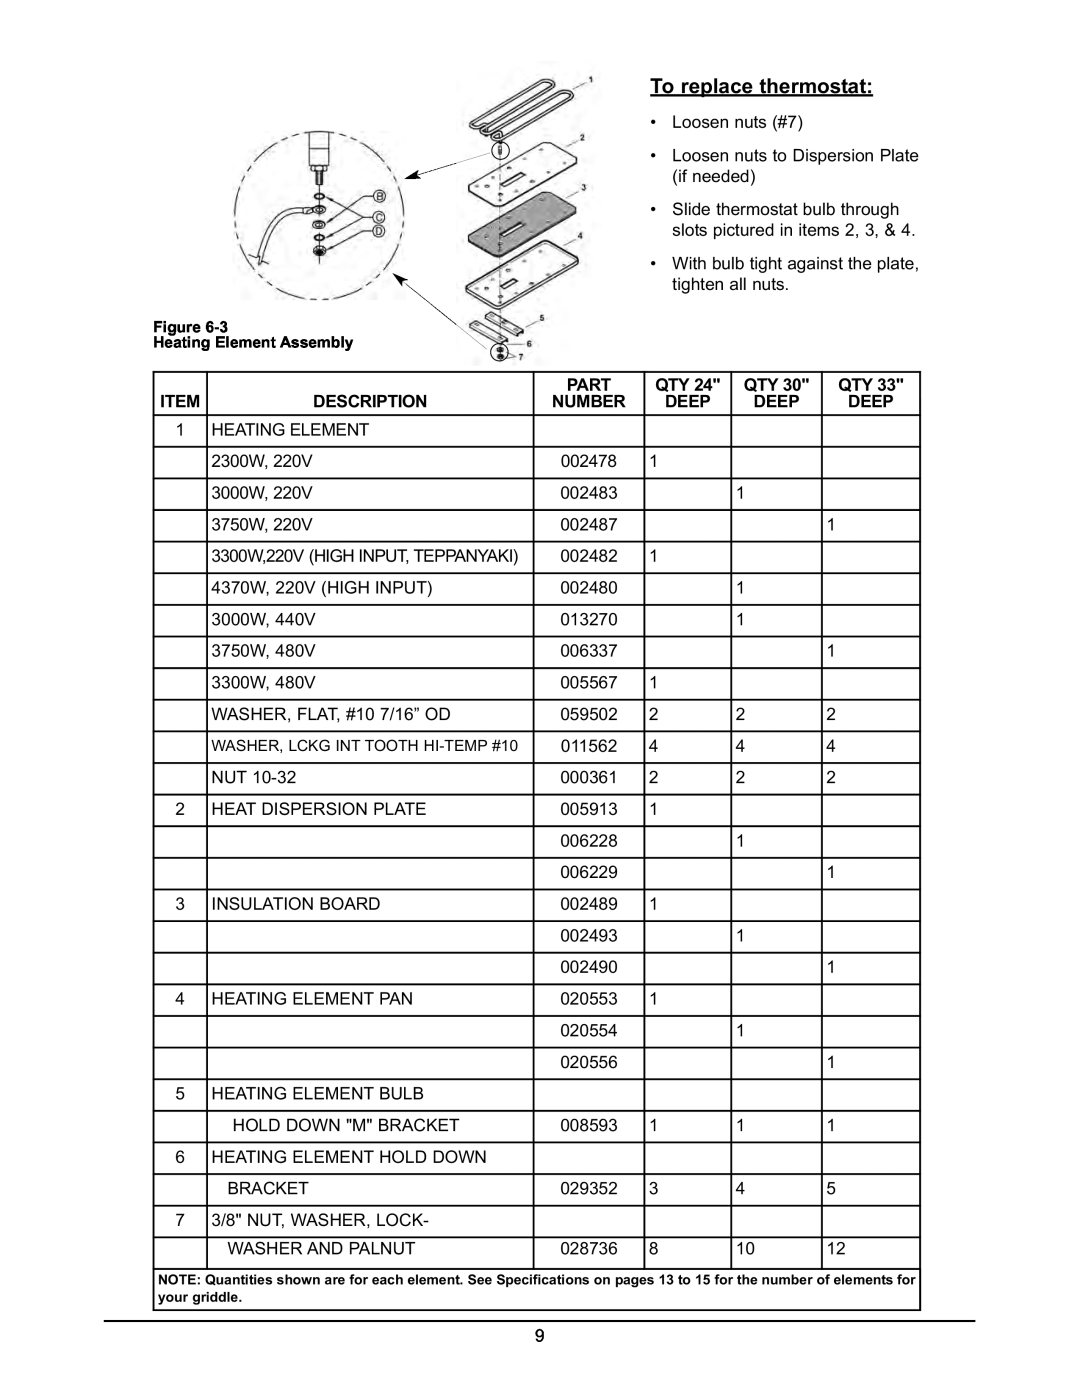 Keating Of Chicago Griddle user manual To replace thermostat, Description, Number, Deep 